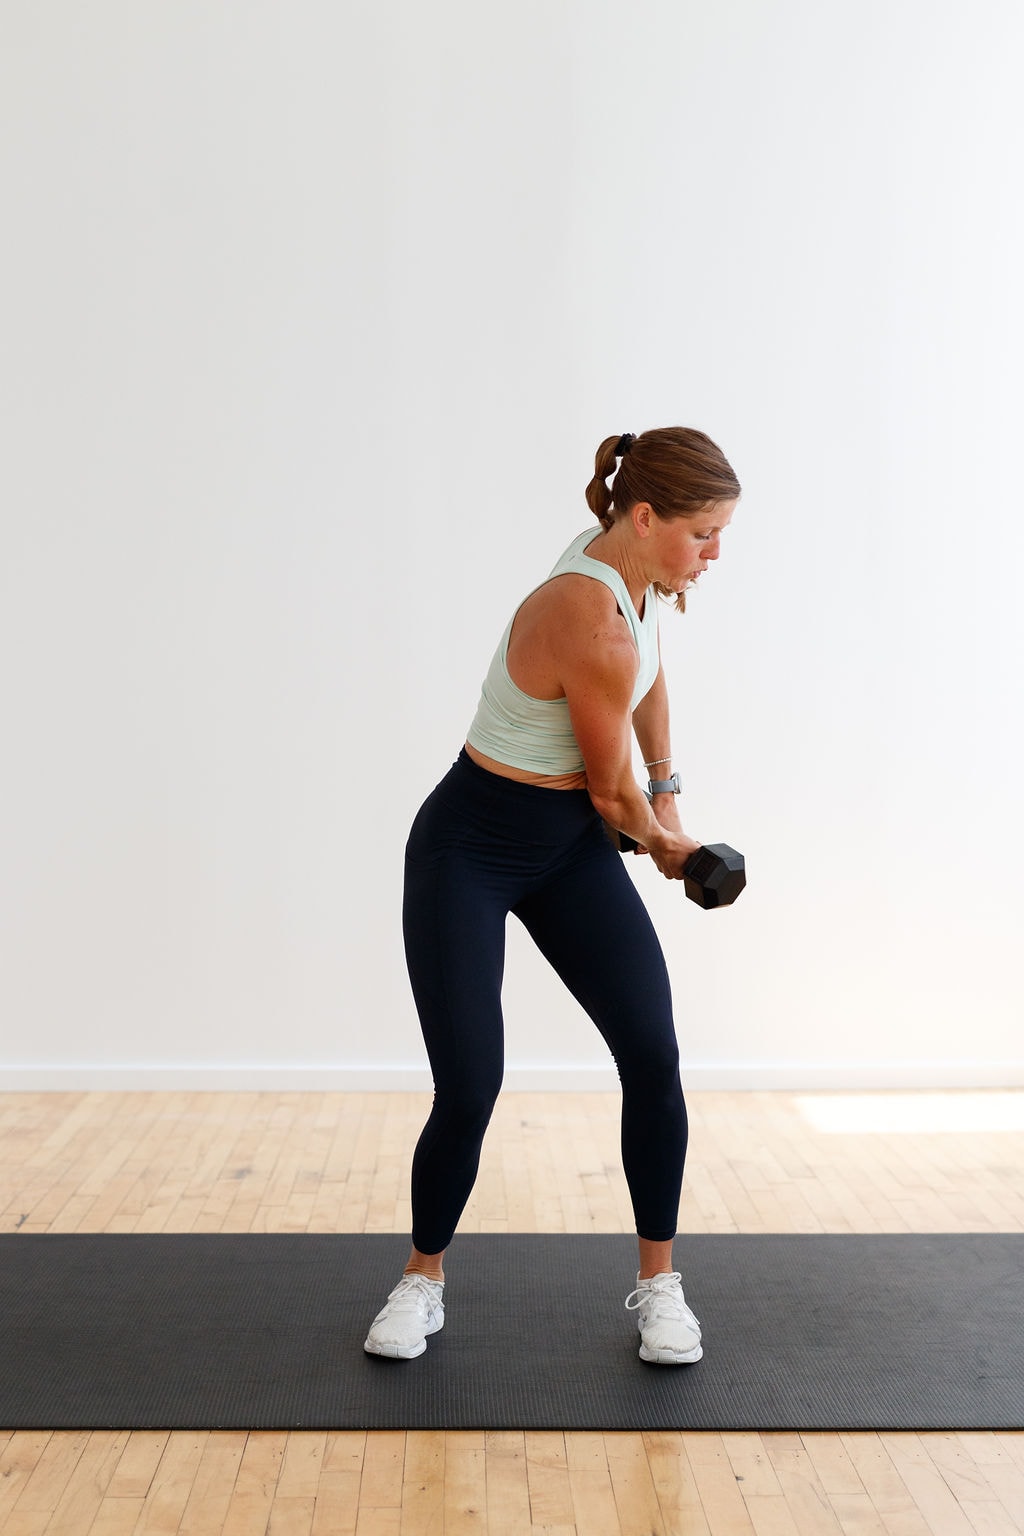 5 HIIT Exercises That Target Your Arms and Abs (at the same time